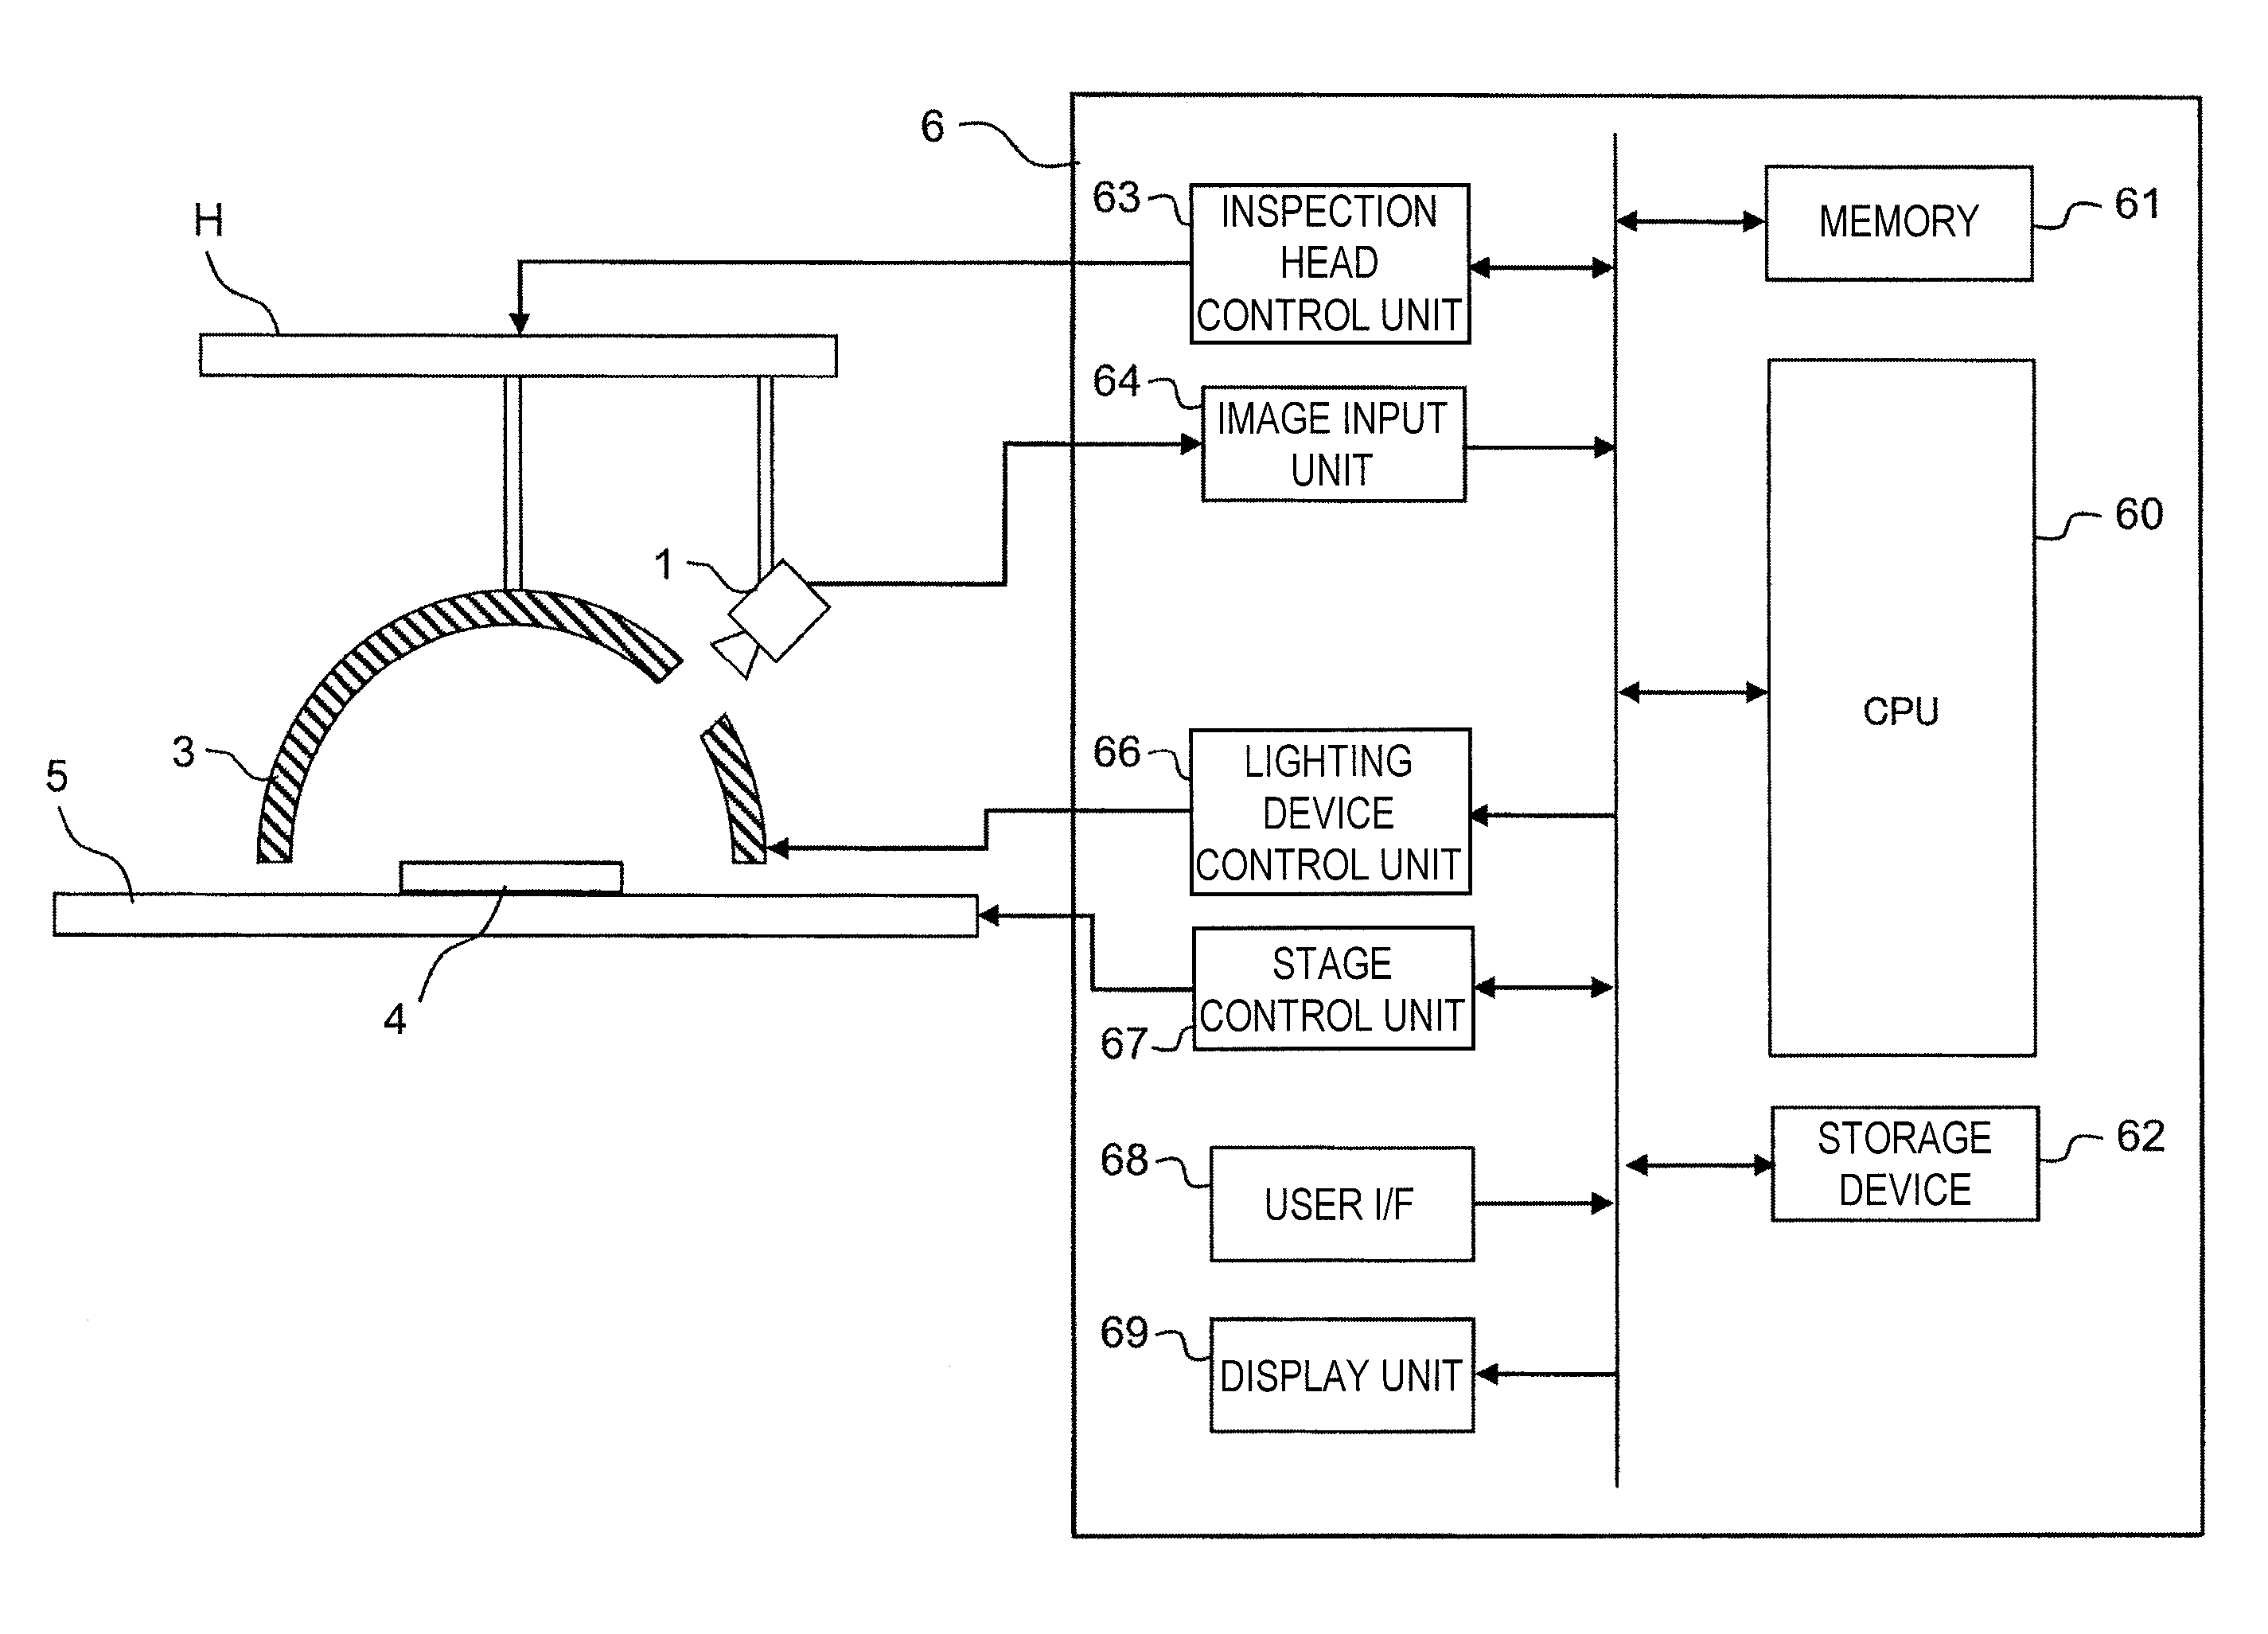 Apparatus and method for inspecting surface state